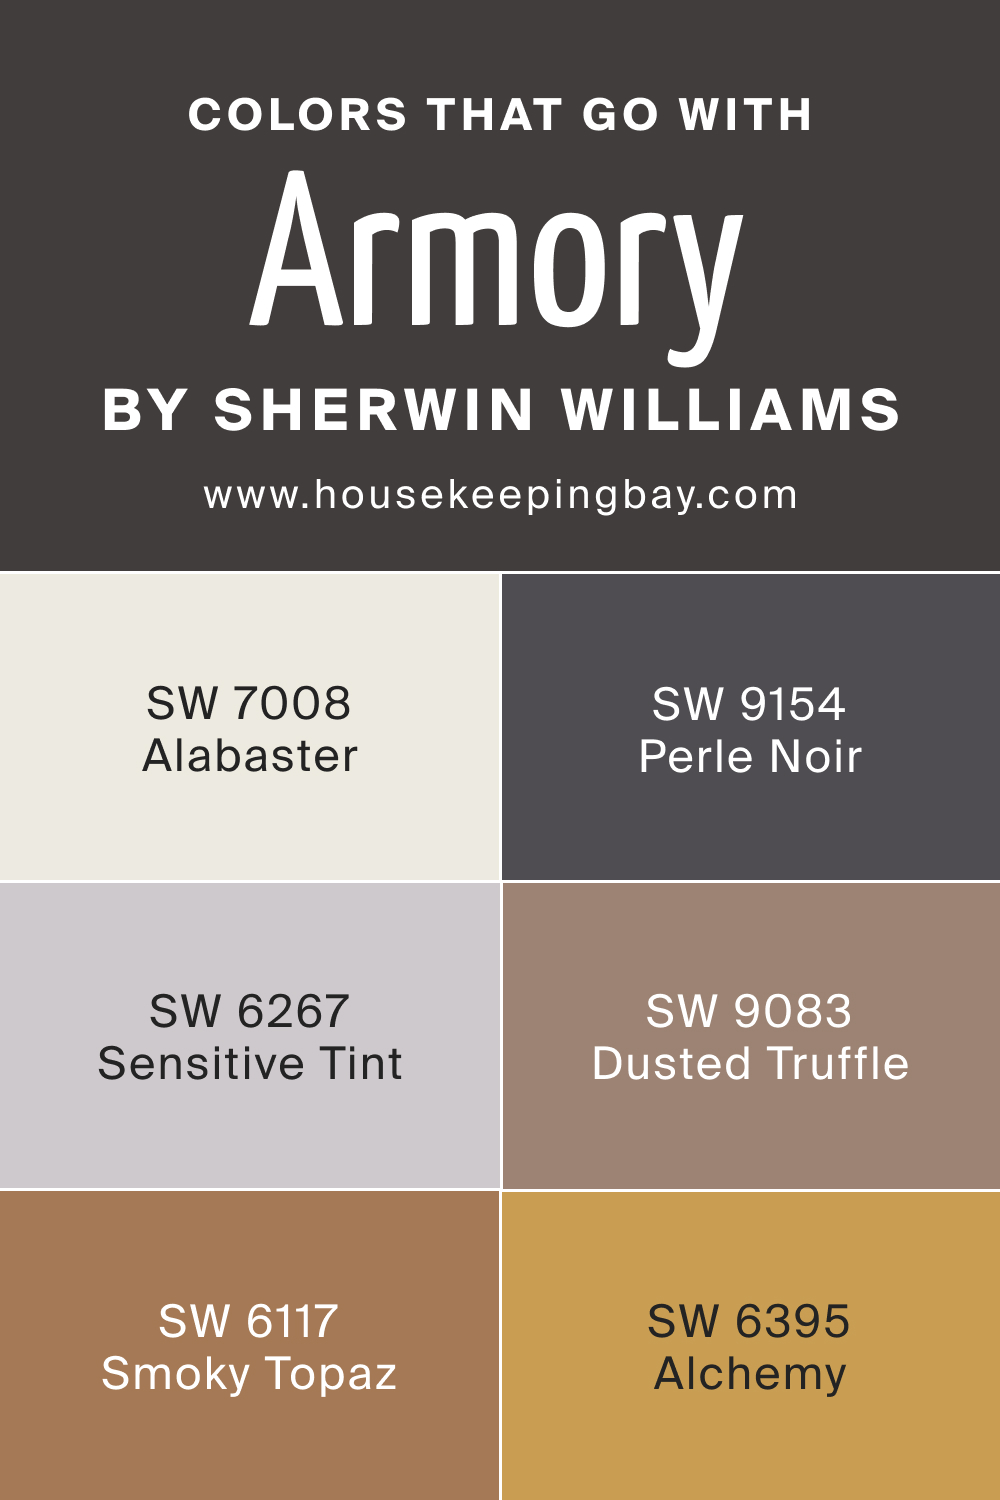 Colors that goes with SW 9600 Armory by Sherwin Williams